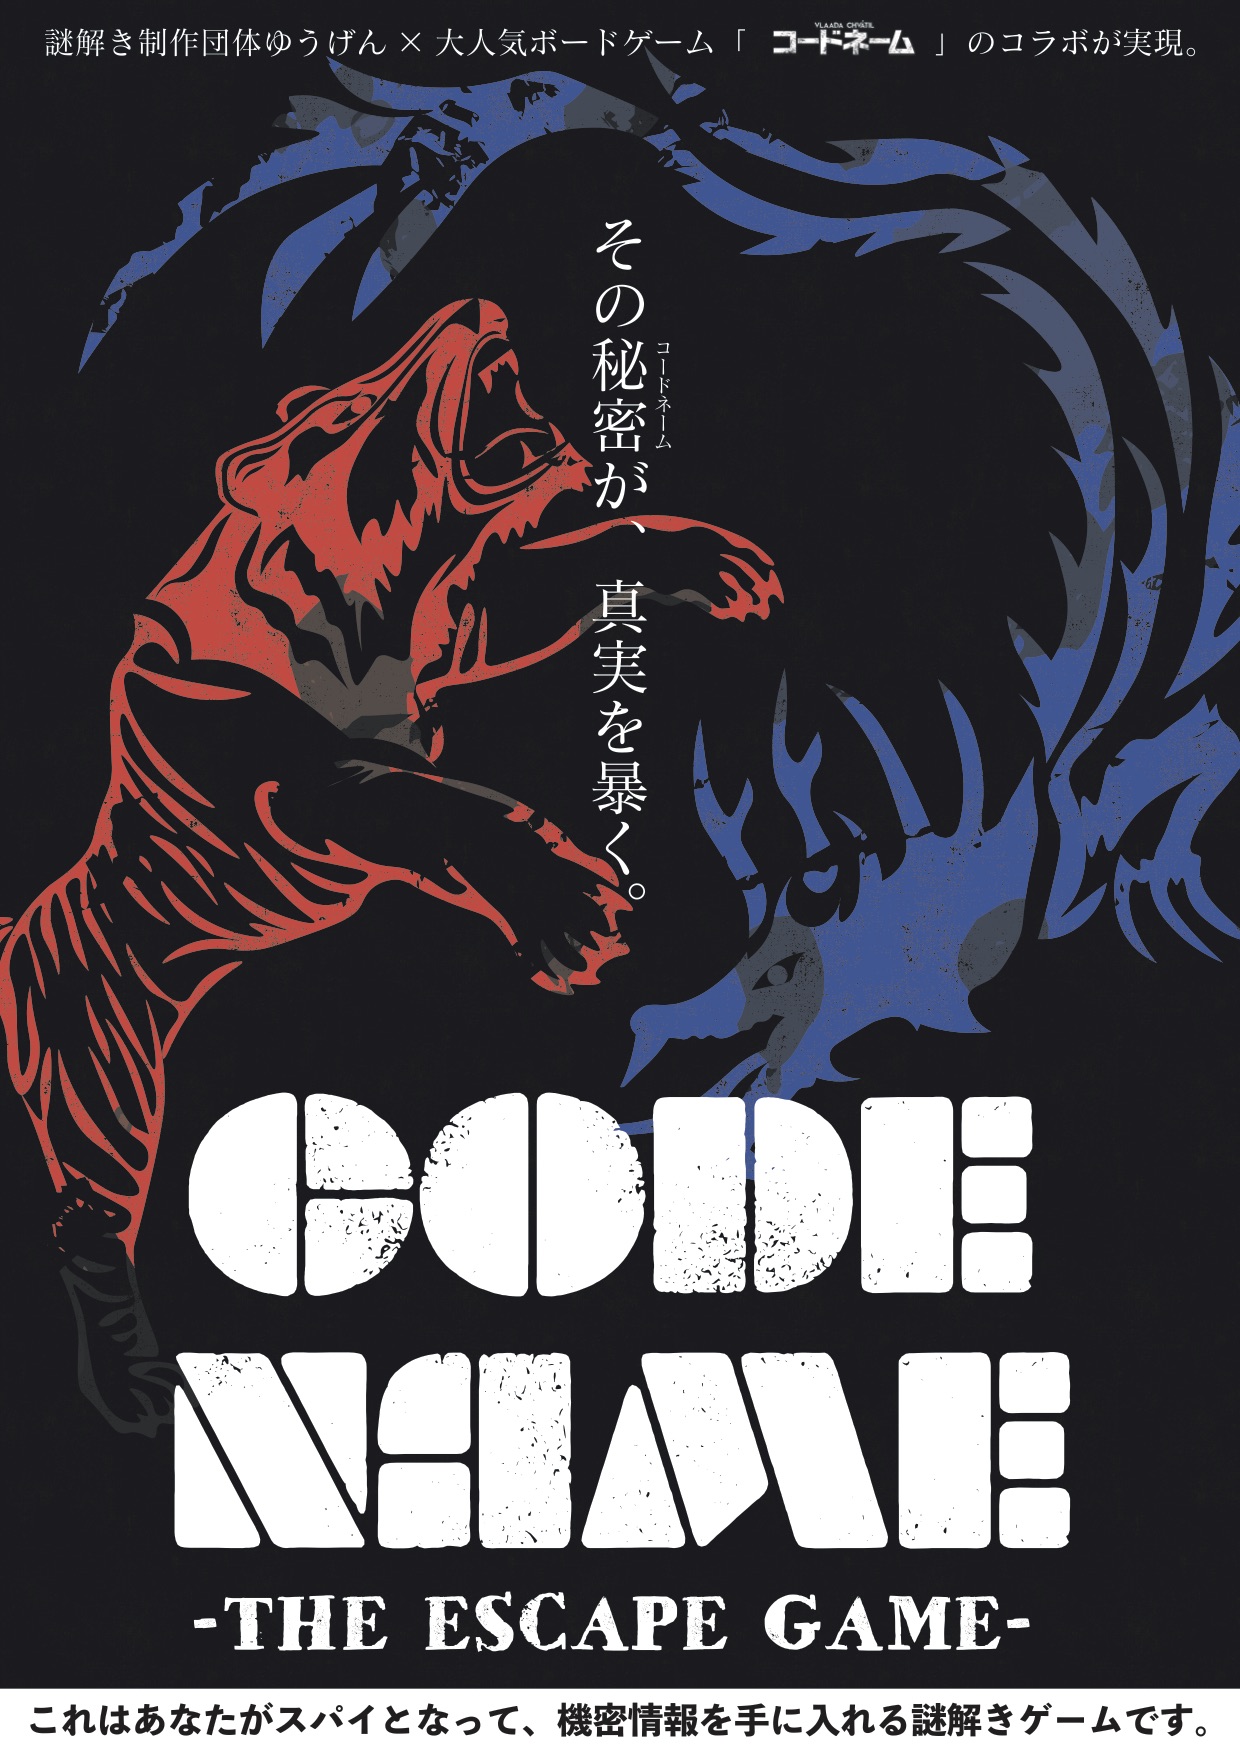 Code Name 9 19 開催 のチケット情報 予約 購入 販売 ライヴポケット